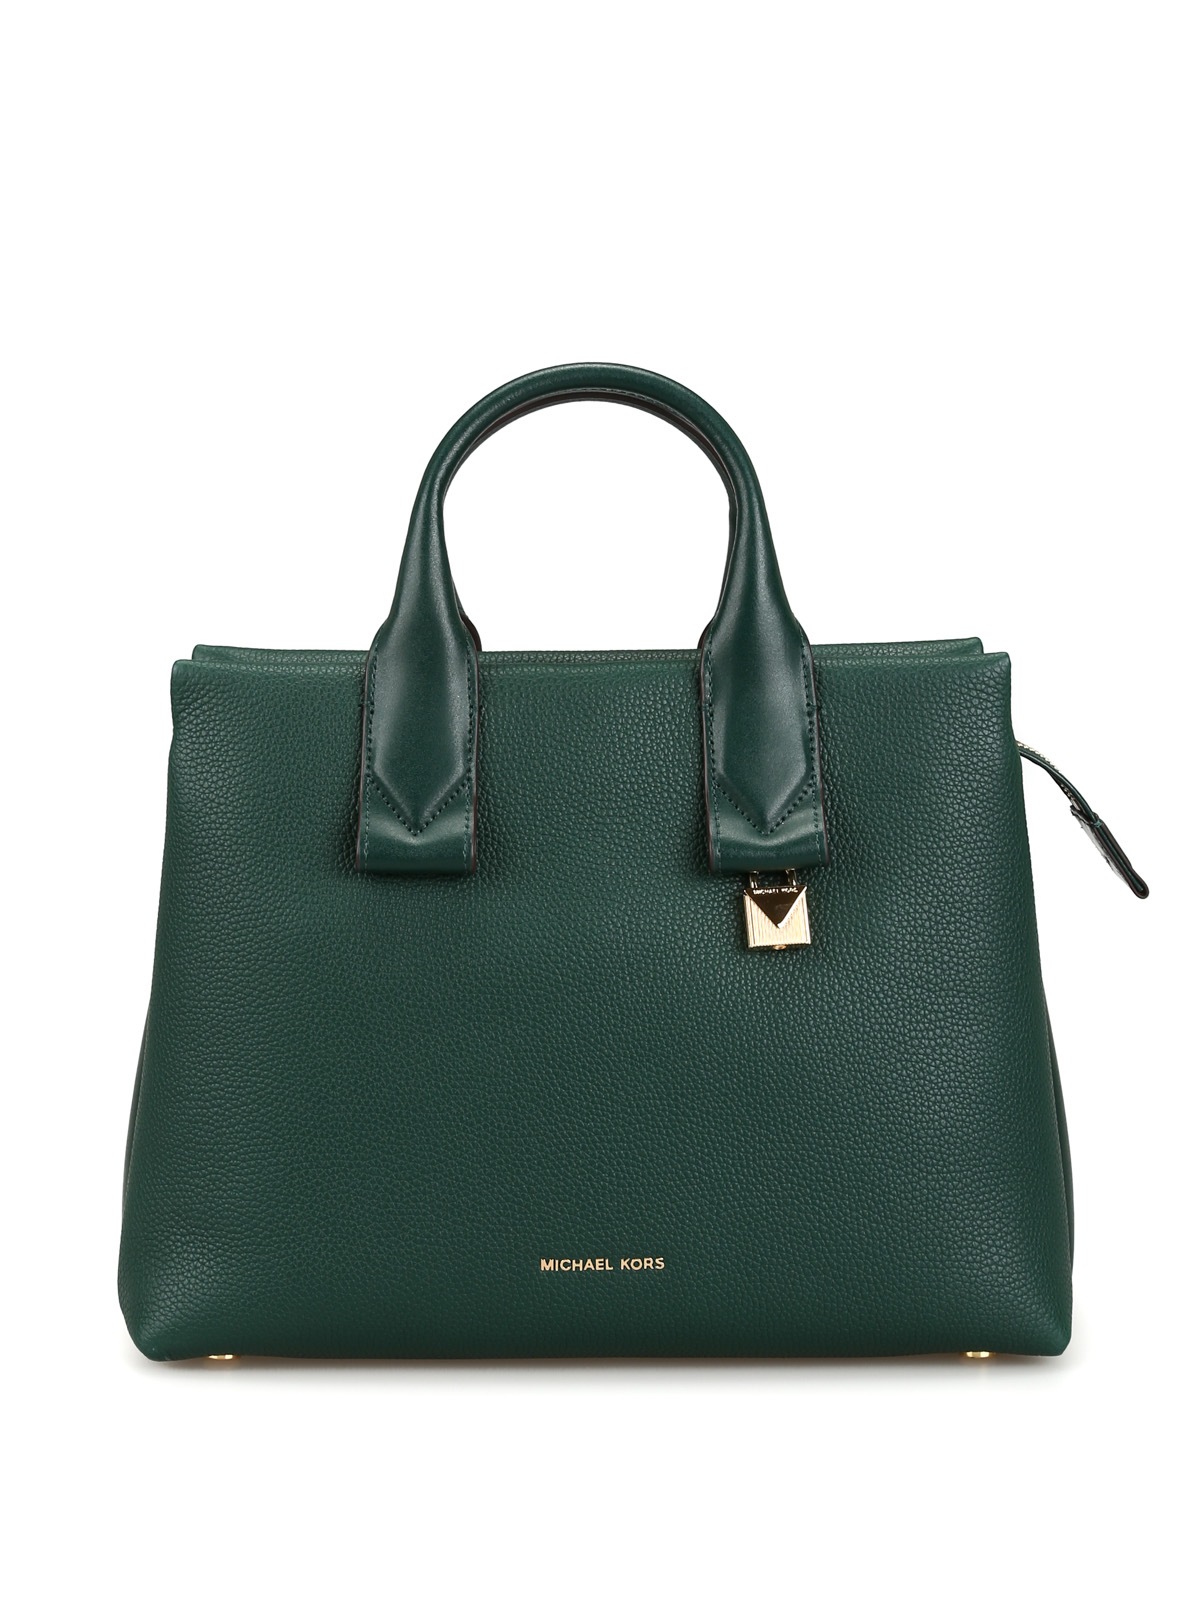 Michael Kors - Rollins dark green leather large tote bag - totes bags - 30F8GX3S3L305